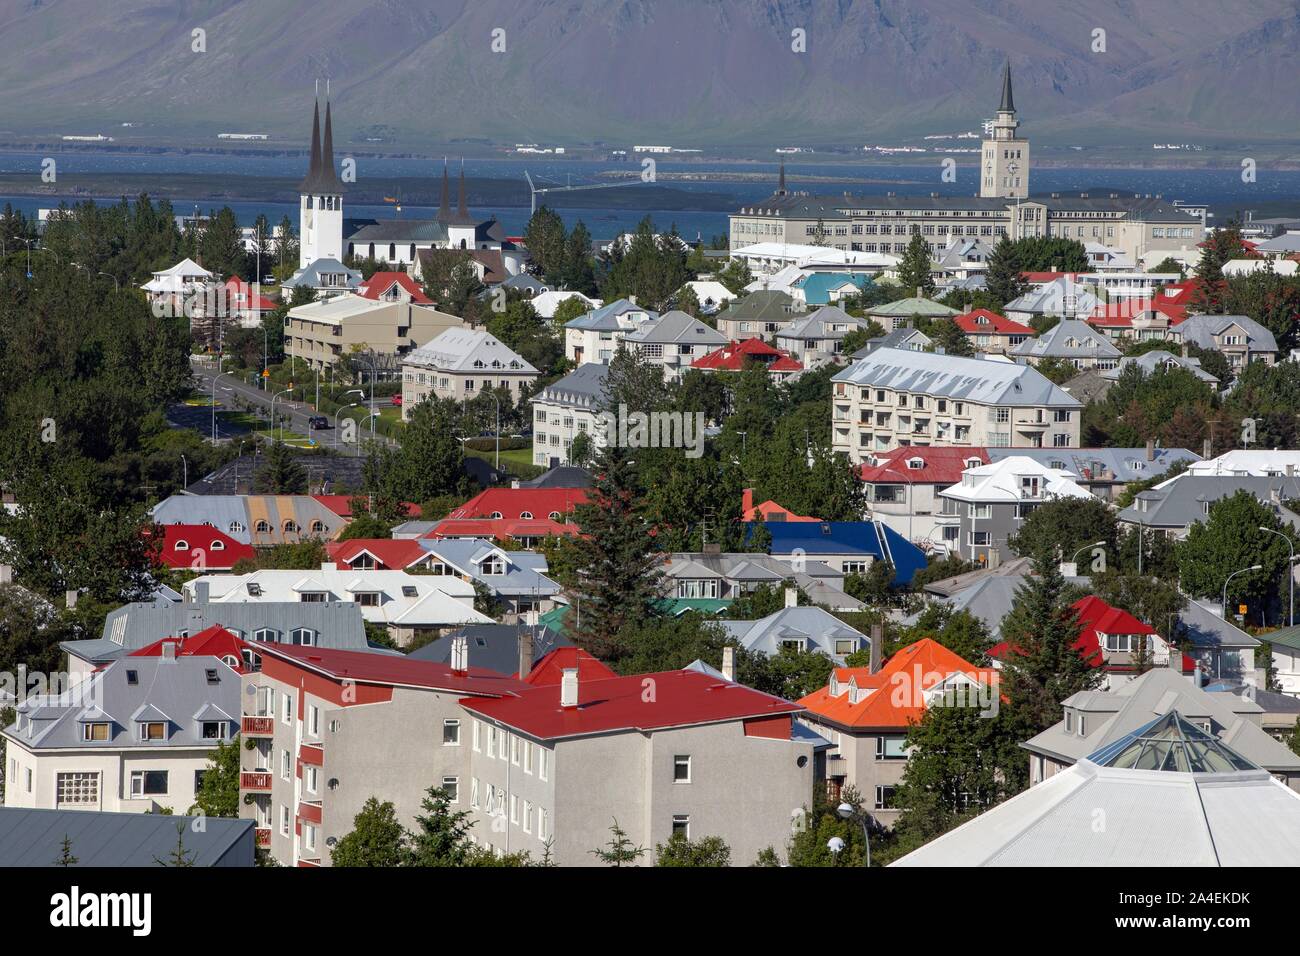 VIEW OF THE CITY CENTER FROM THE RESTAURANT THE PERLAN, REYKJAVIK, ICELAND Stock Photo